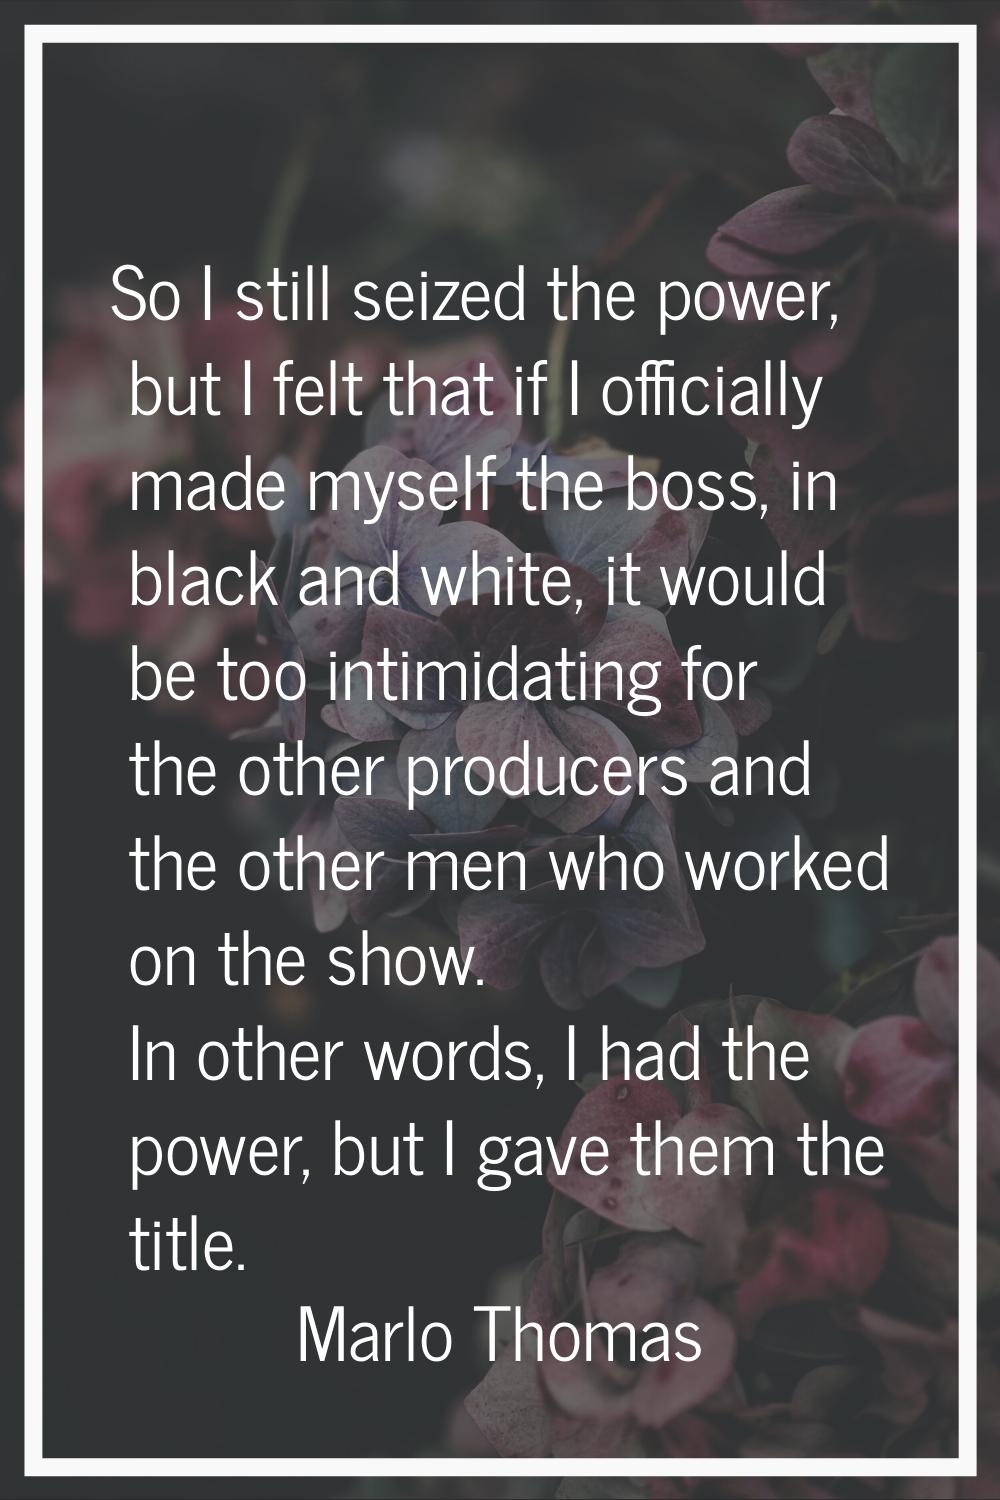 So I still seized the power, but I felt that if I officially made myself the boss, in black and whi